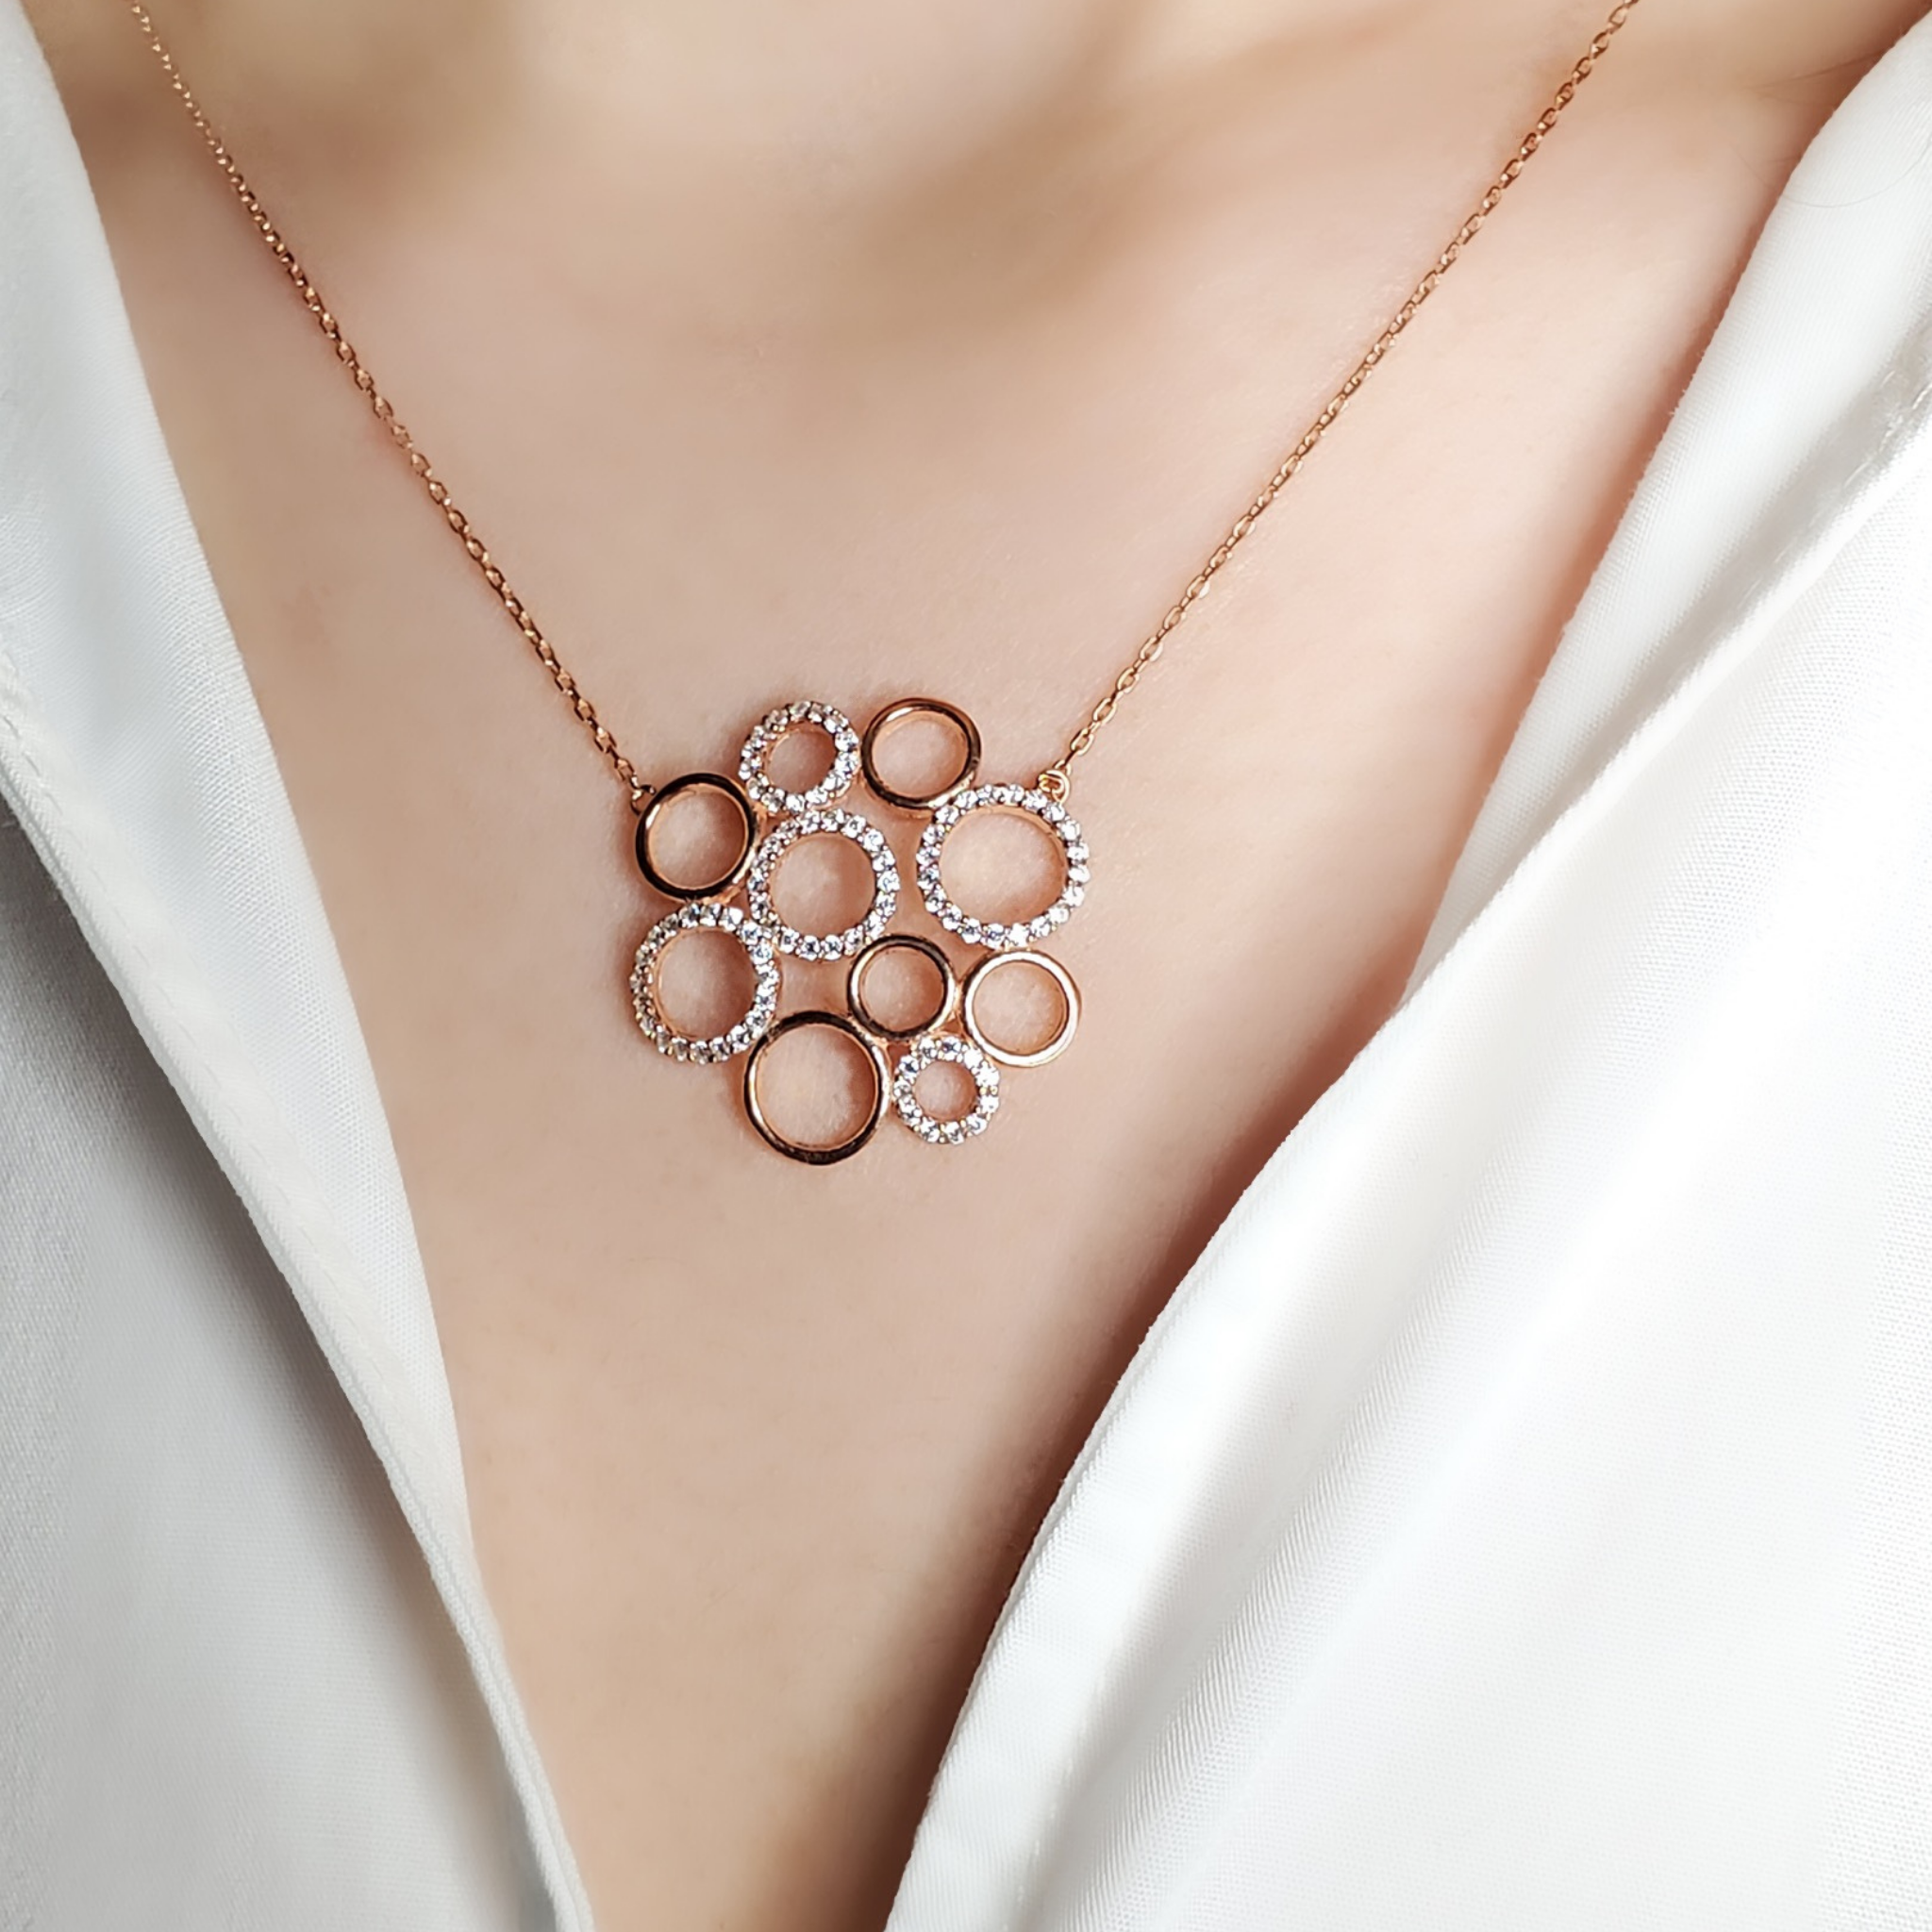 Circles necklace photo on a model.